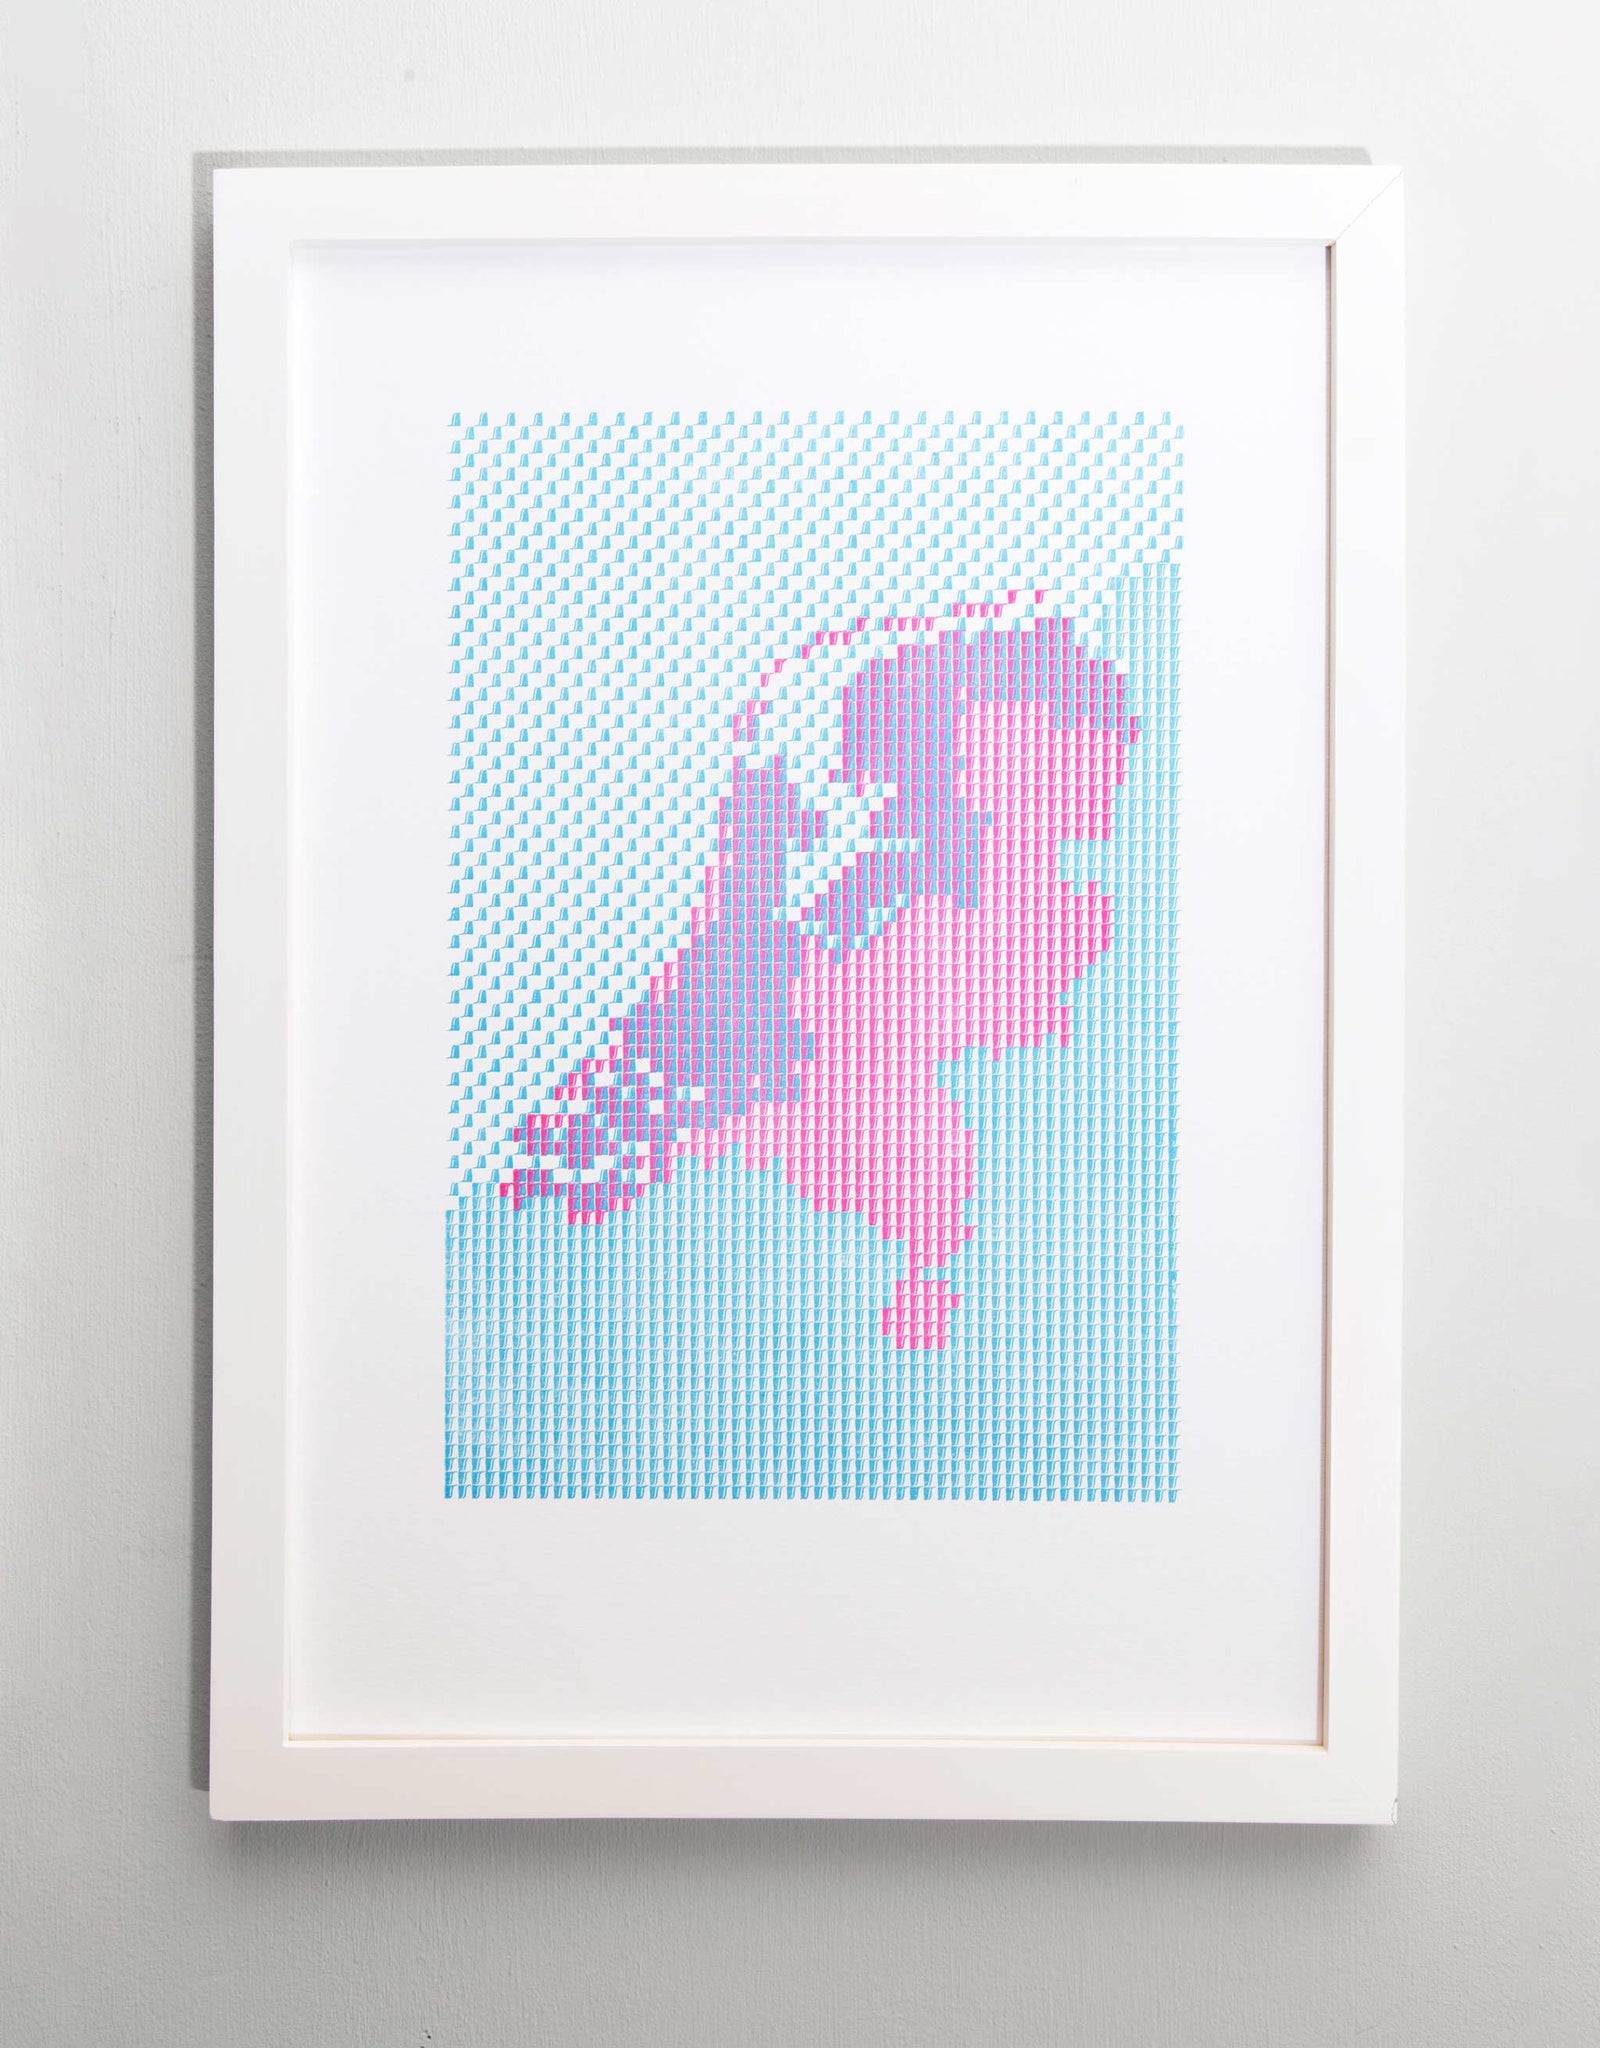 Letterpress patterned map of The Netherlands in magenta and blue. Shown in white frame.